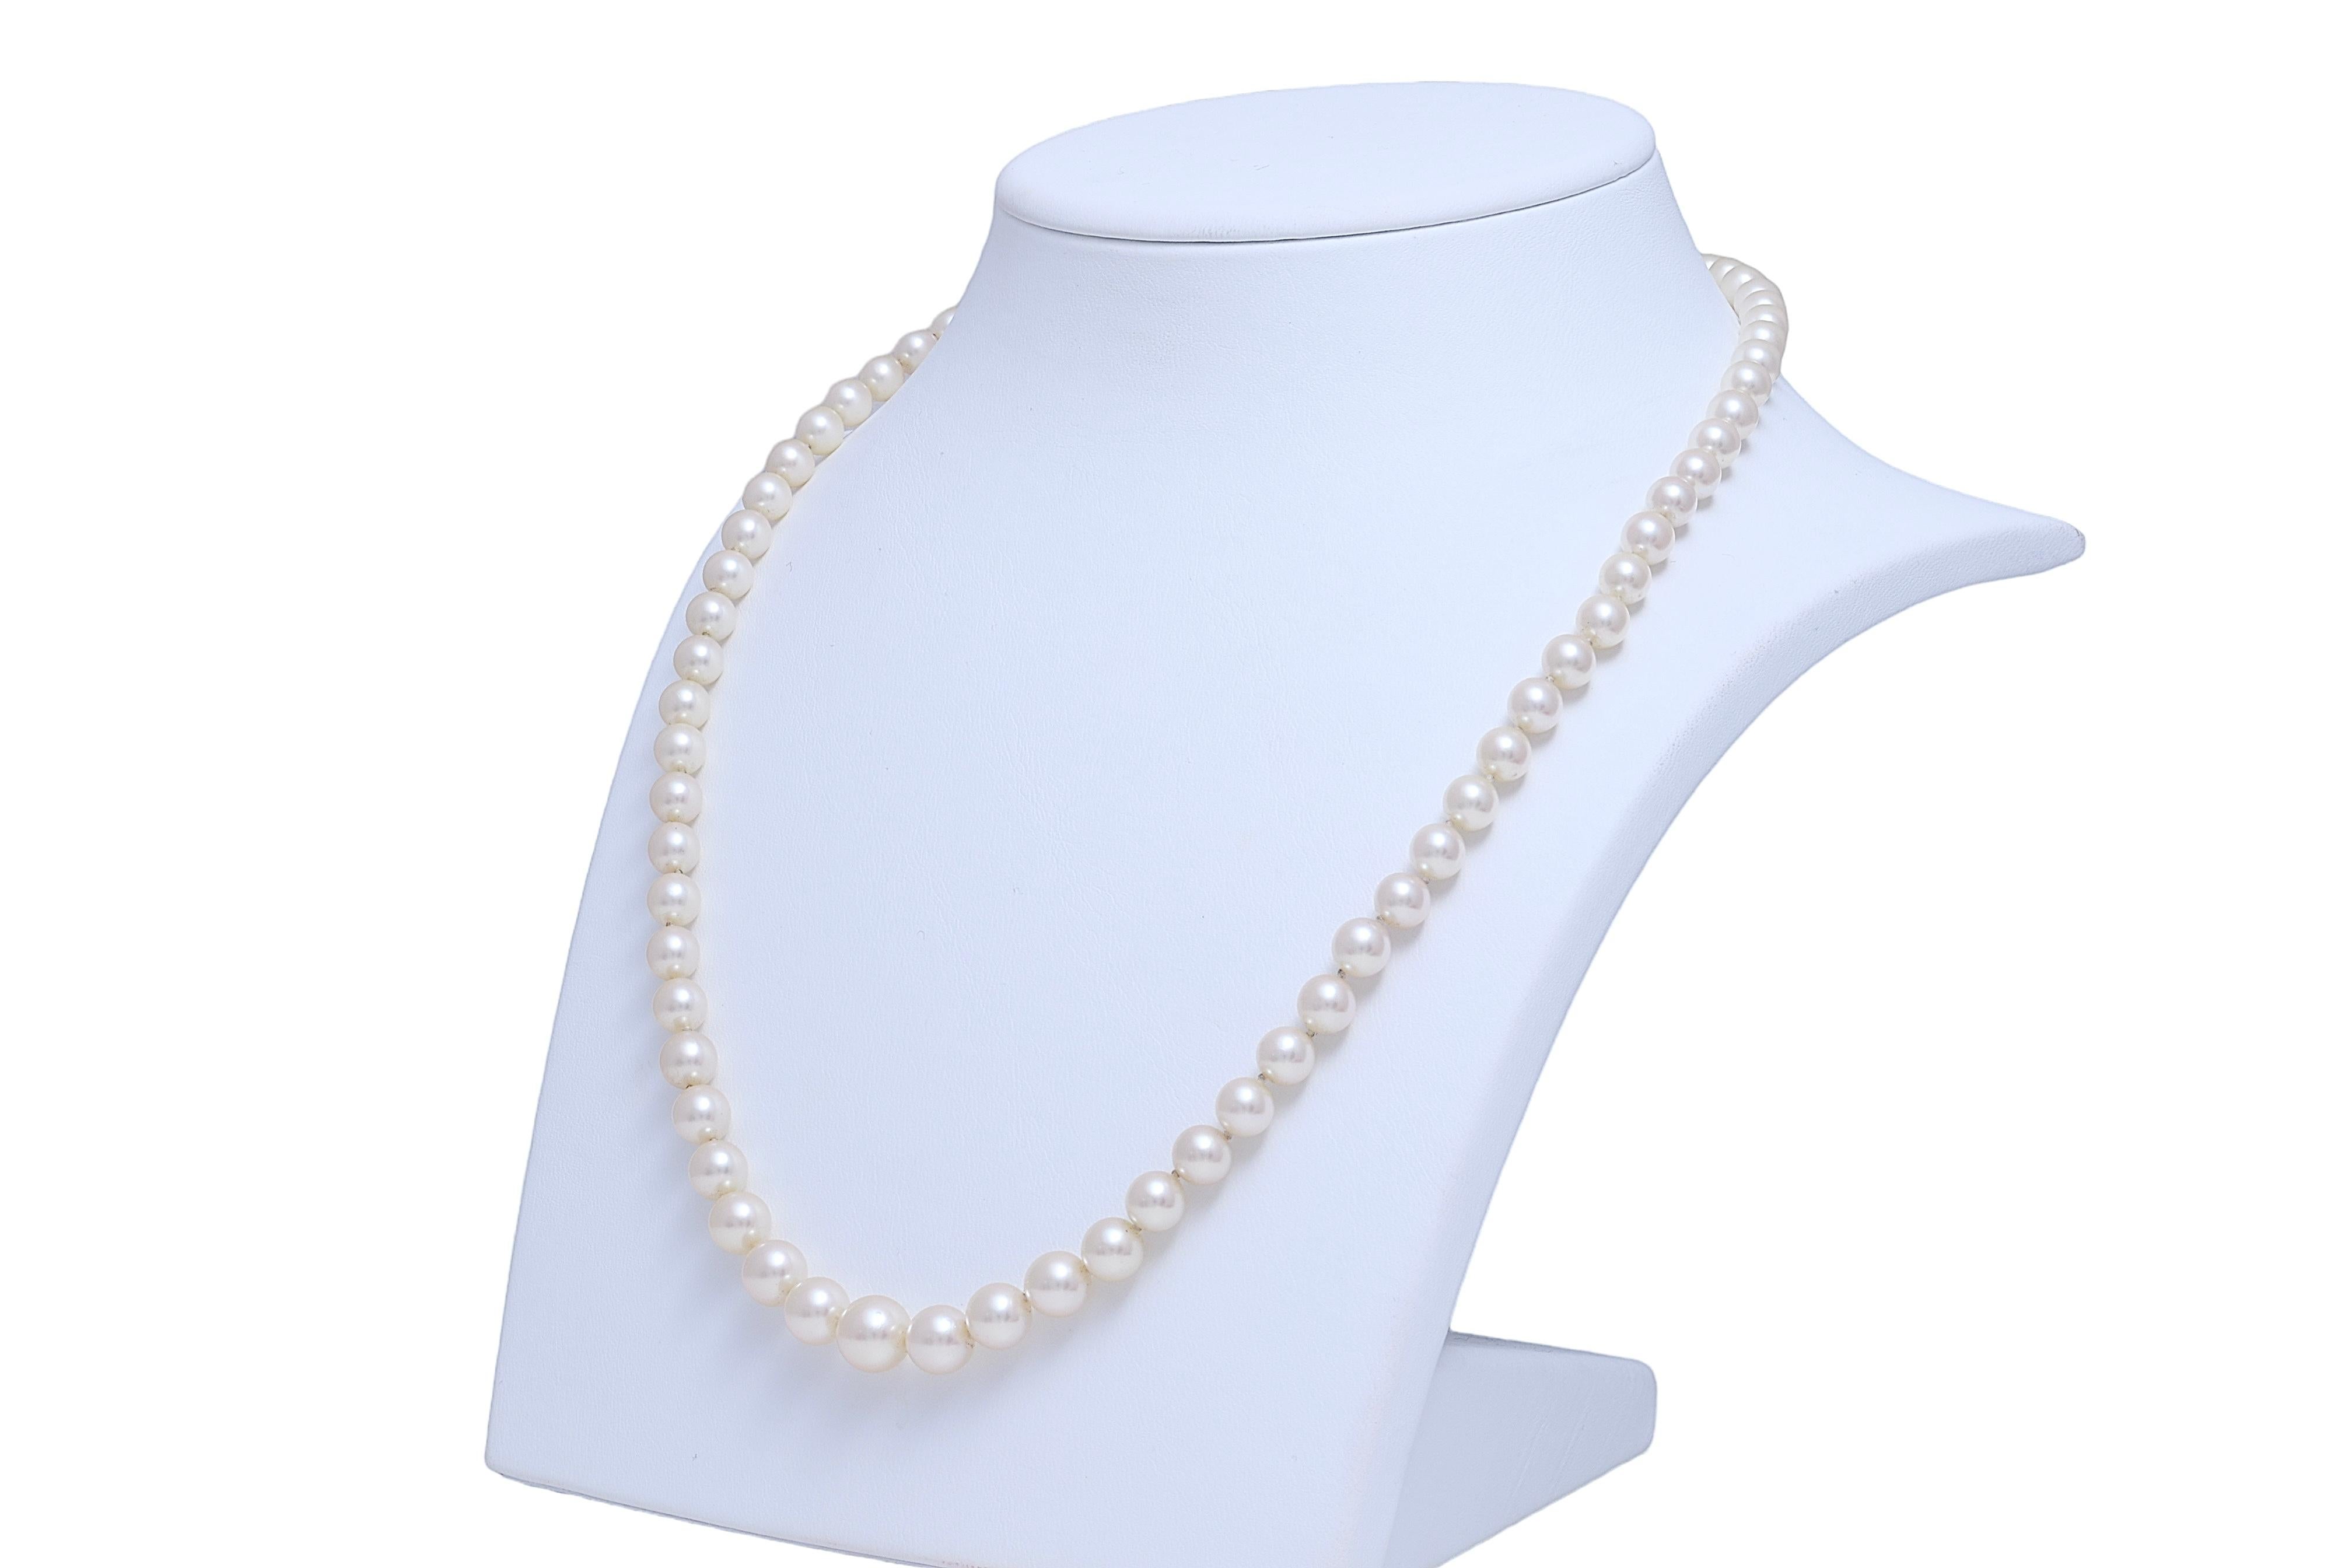 Platinum Diamond Lock on Japanese Akoya Degradé Pearl Necklace 

Pearls: 74 Akoya Pearls from 5.6 mm to 9 mm

Diamonds: 3 Brilliant cut diamonds together approx. 0.18 ct. 

Material lock: Platinum

Measurements: 52 cm long (can be made shorter or